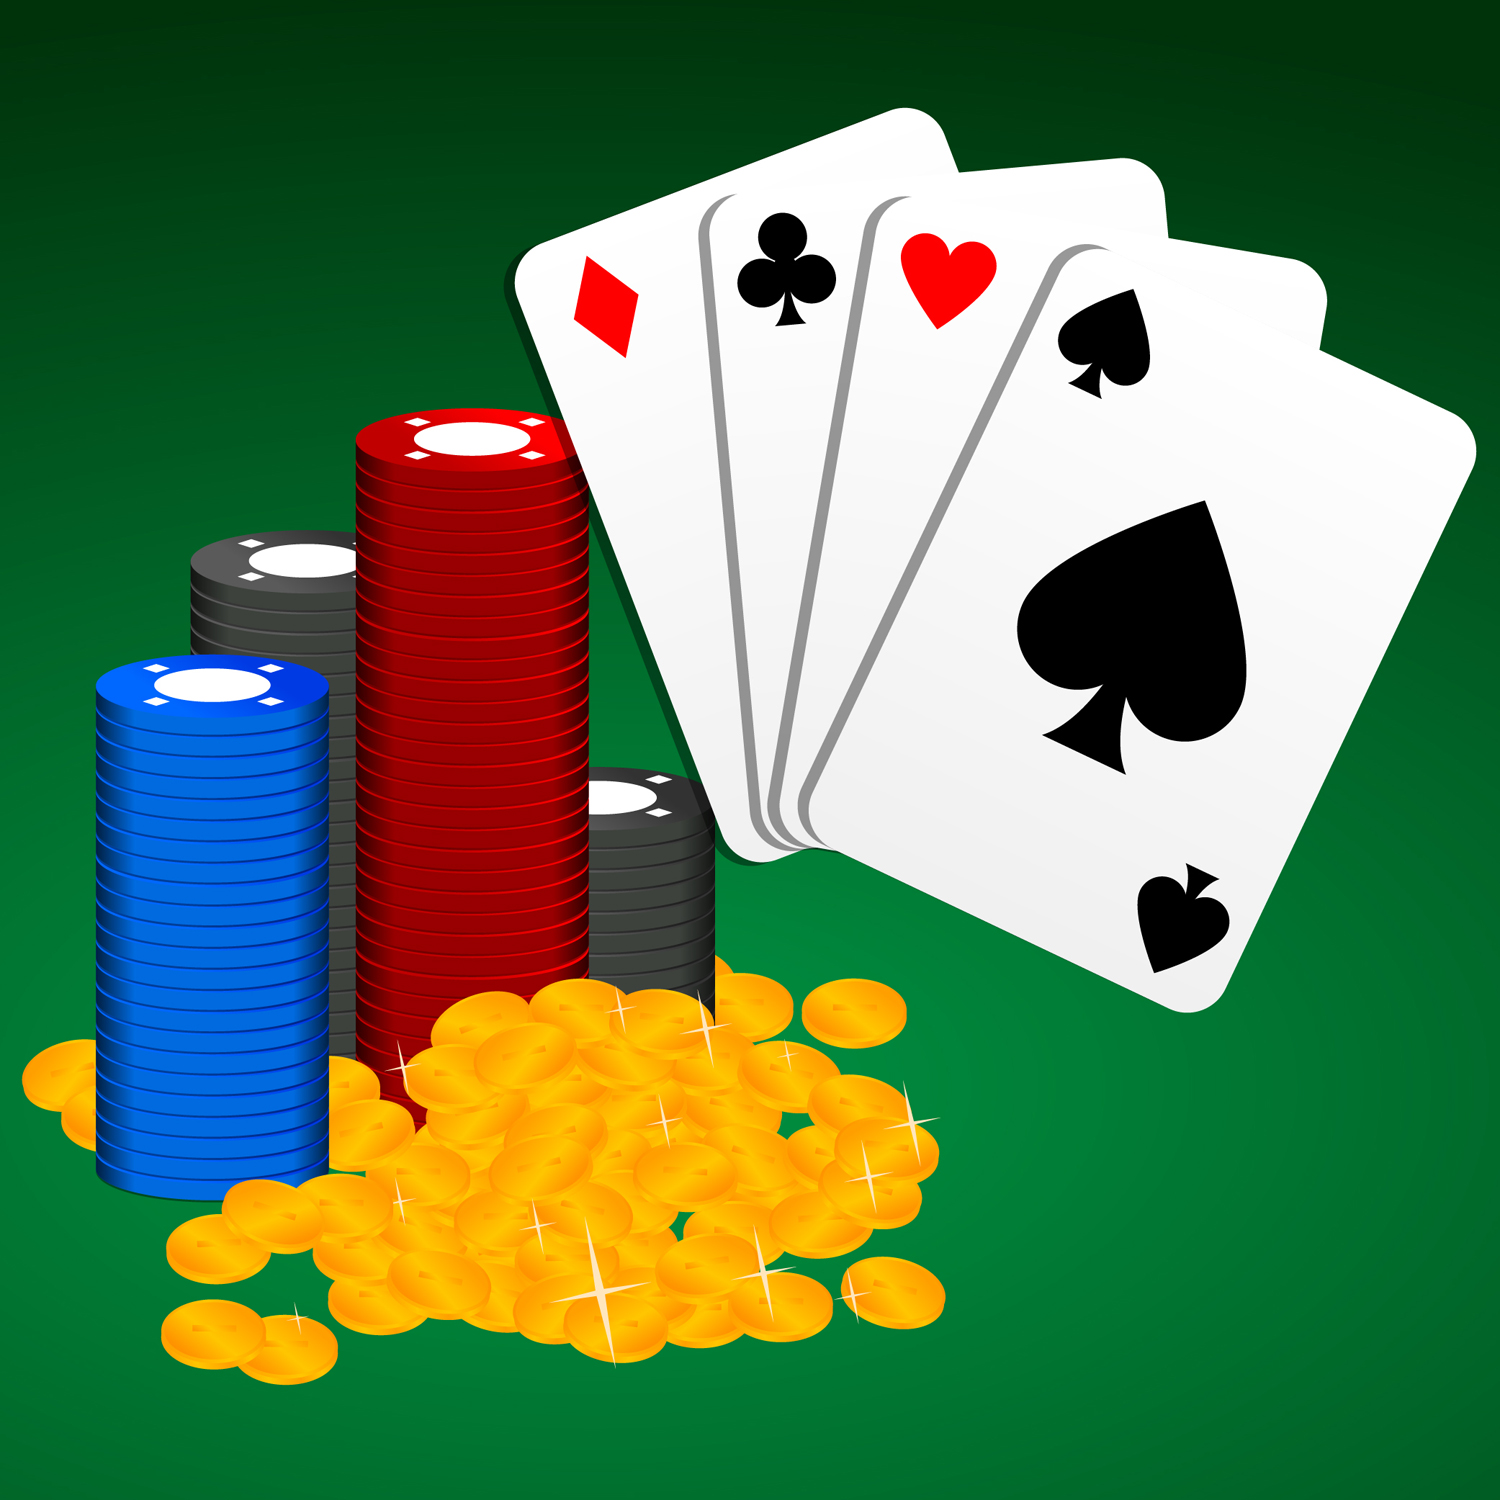 Casino Chips   Playing Cards   Vector Illustration Of Multicolored